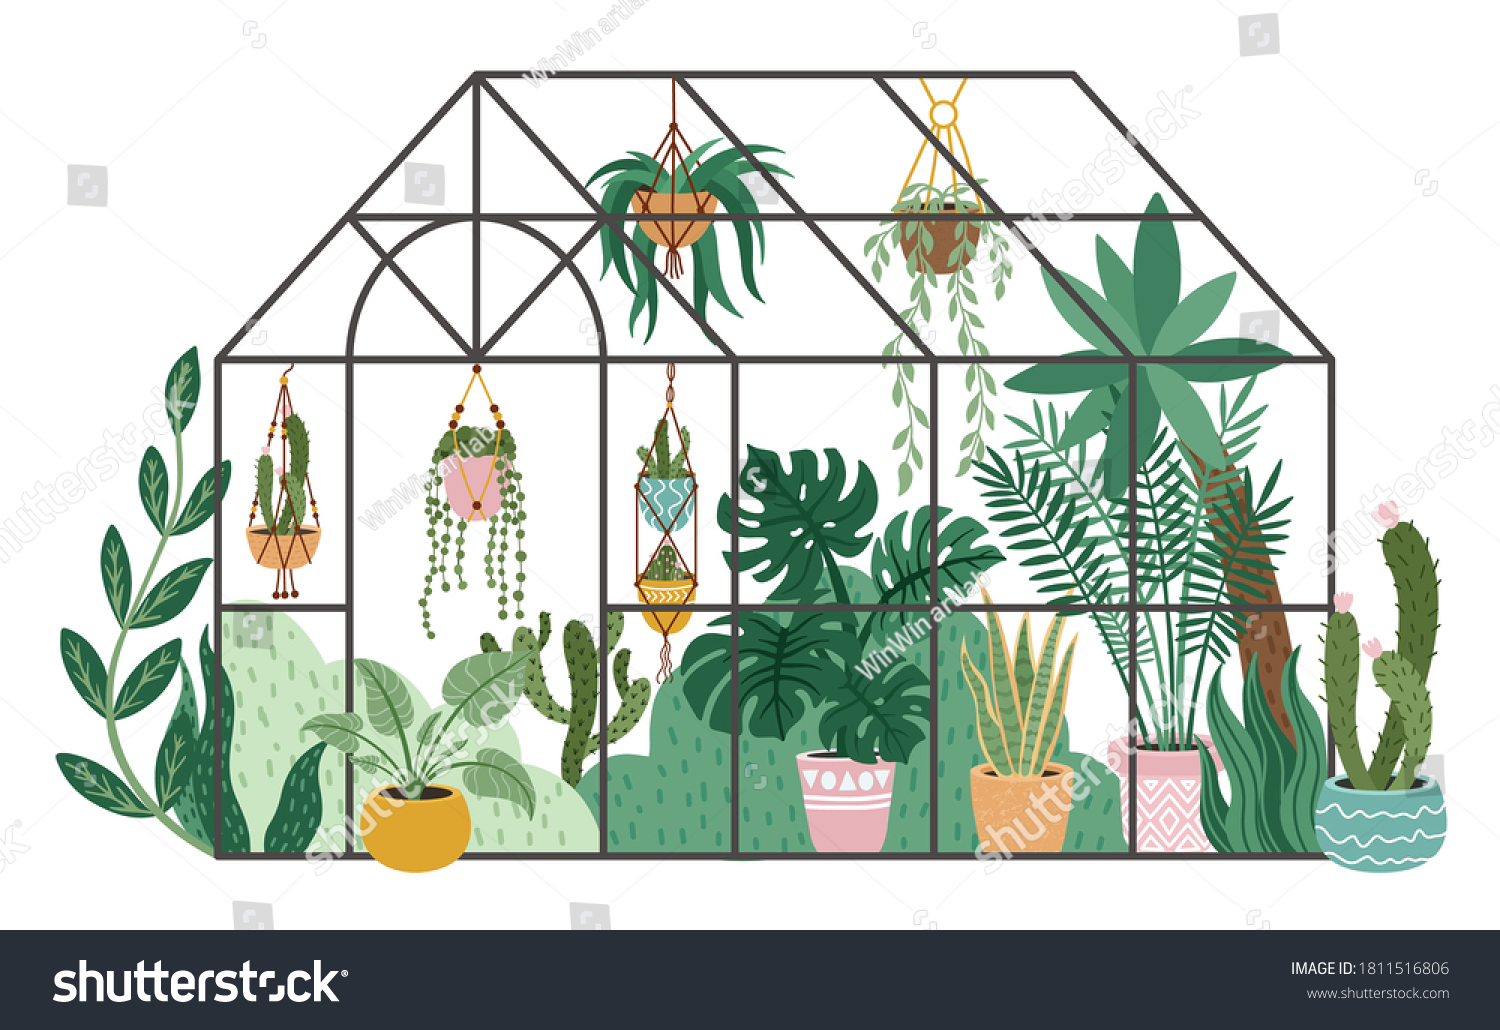 SVG of Planting greenhouse. Glass orangery, botanical garden greenhouse, flowers and potted plants home gardening isolated vector illustration. Plants hanging on ropes, growing greenery in pots svg